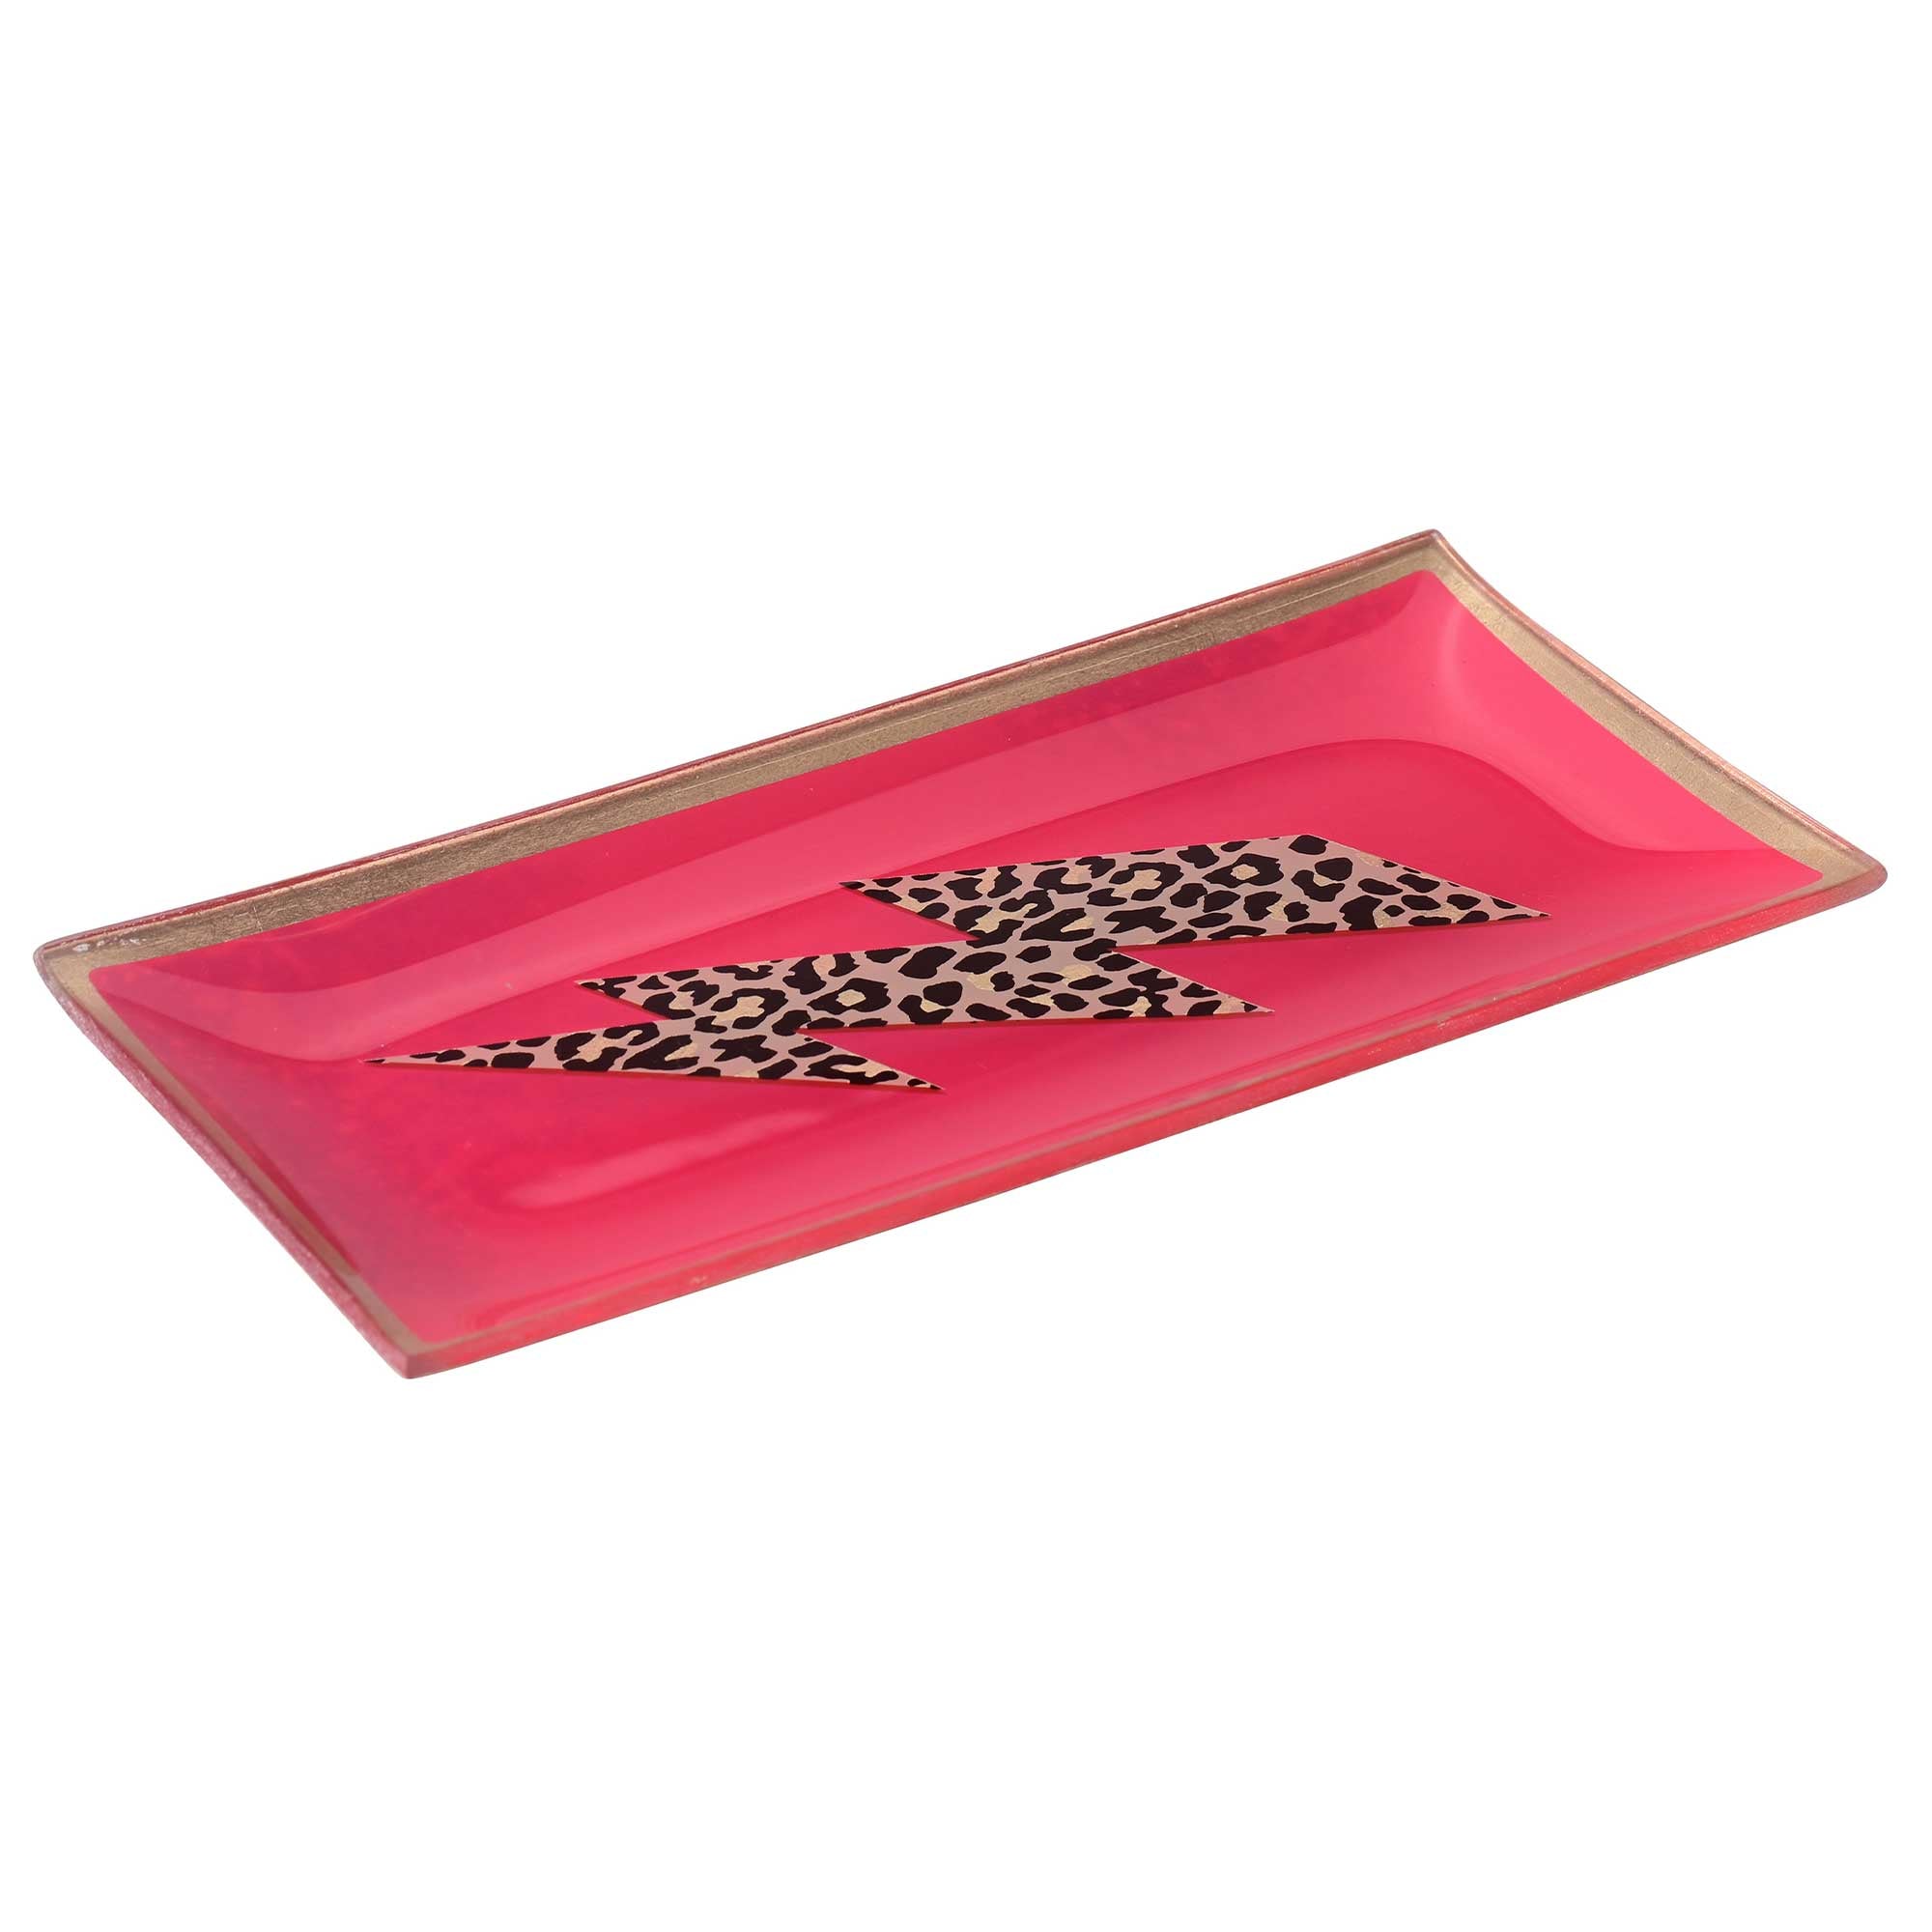 Glass plate "FLASH" neon pink